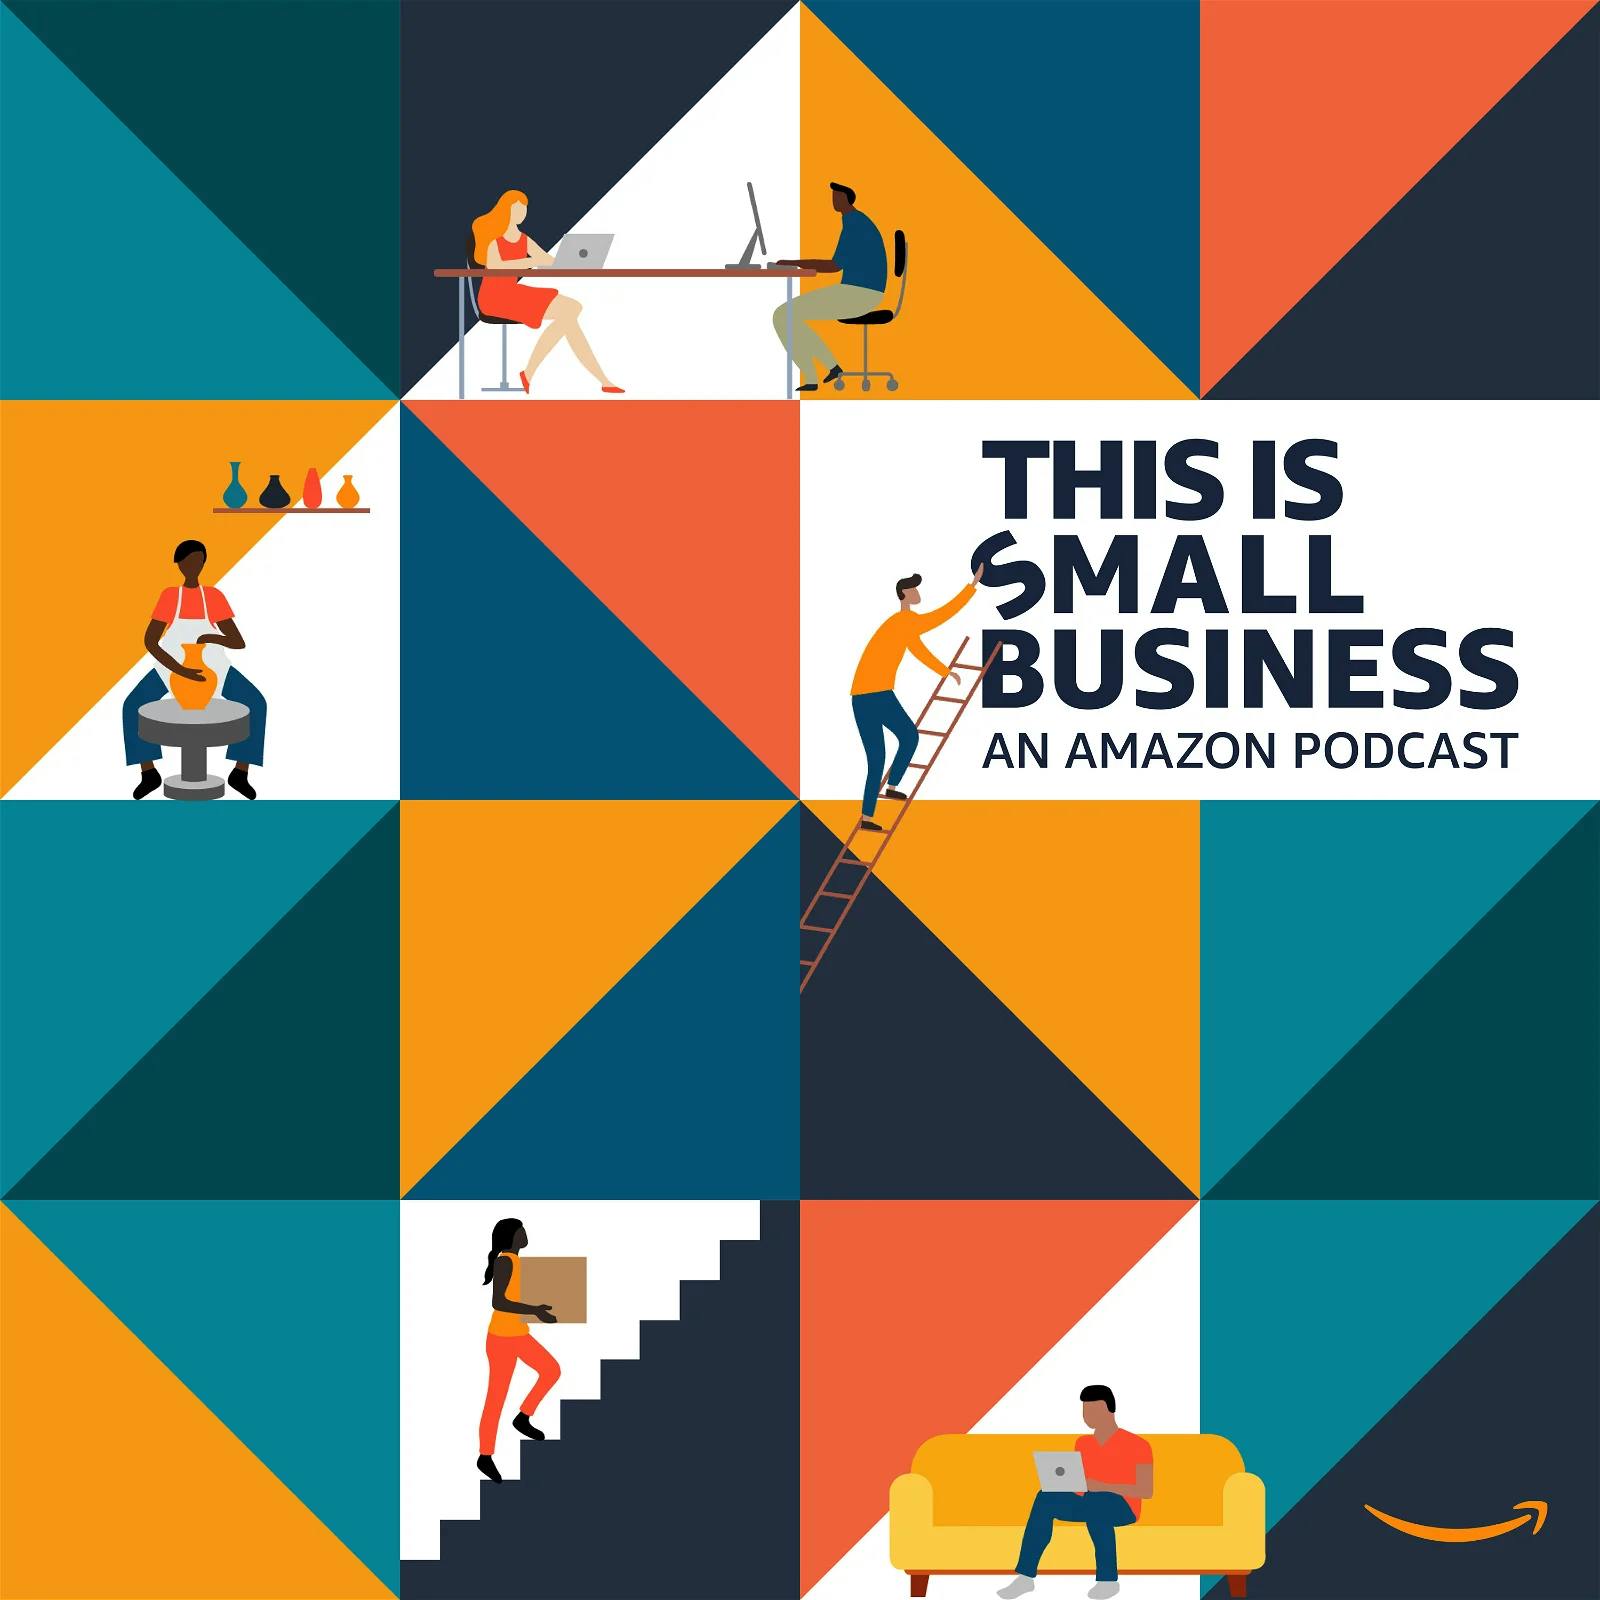 Review: This Is Small Business from Amazon